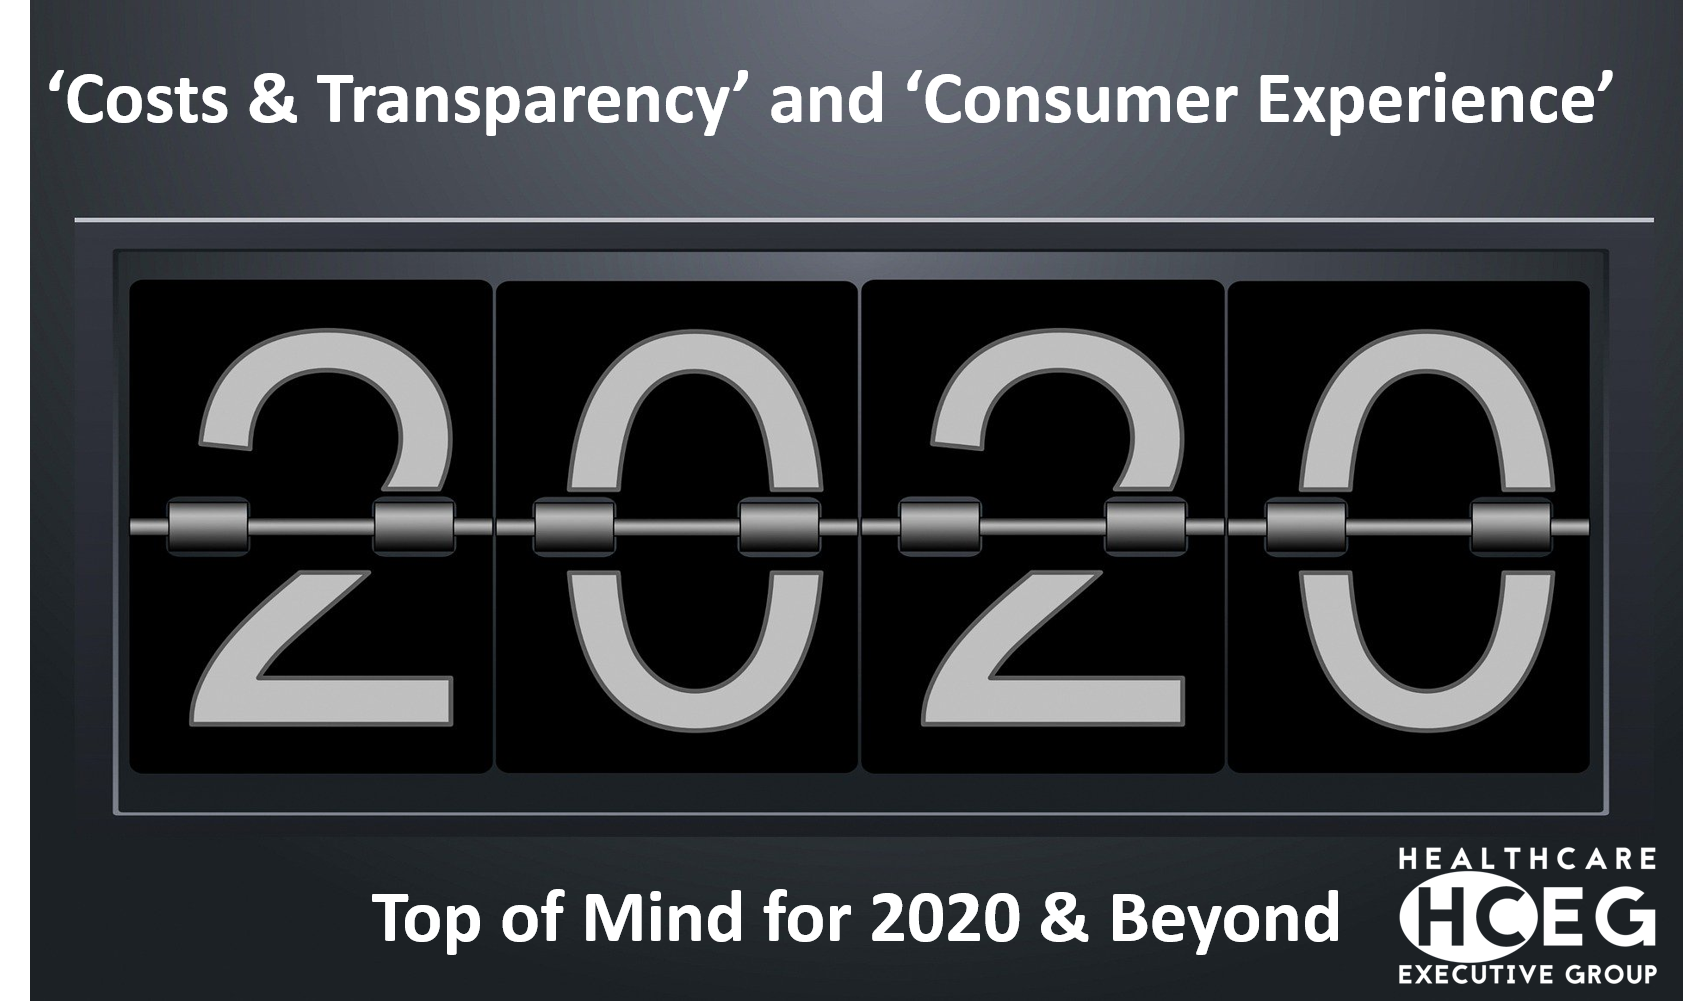 Healthcare ‘Costs & Transparency’ and ‘Consumer Experience’ – Top of Mind for 2020 & Beyond